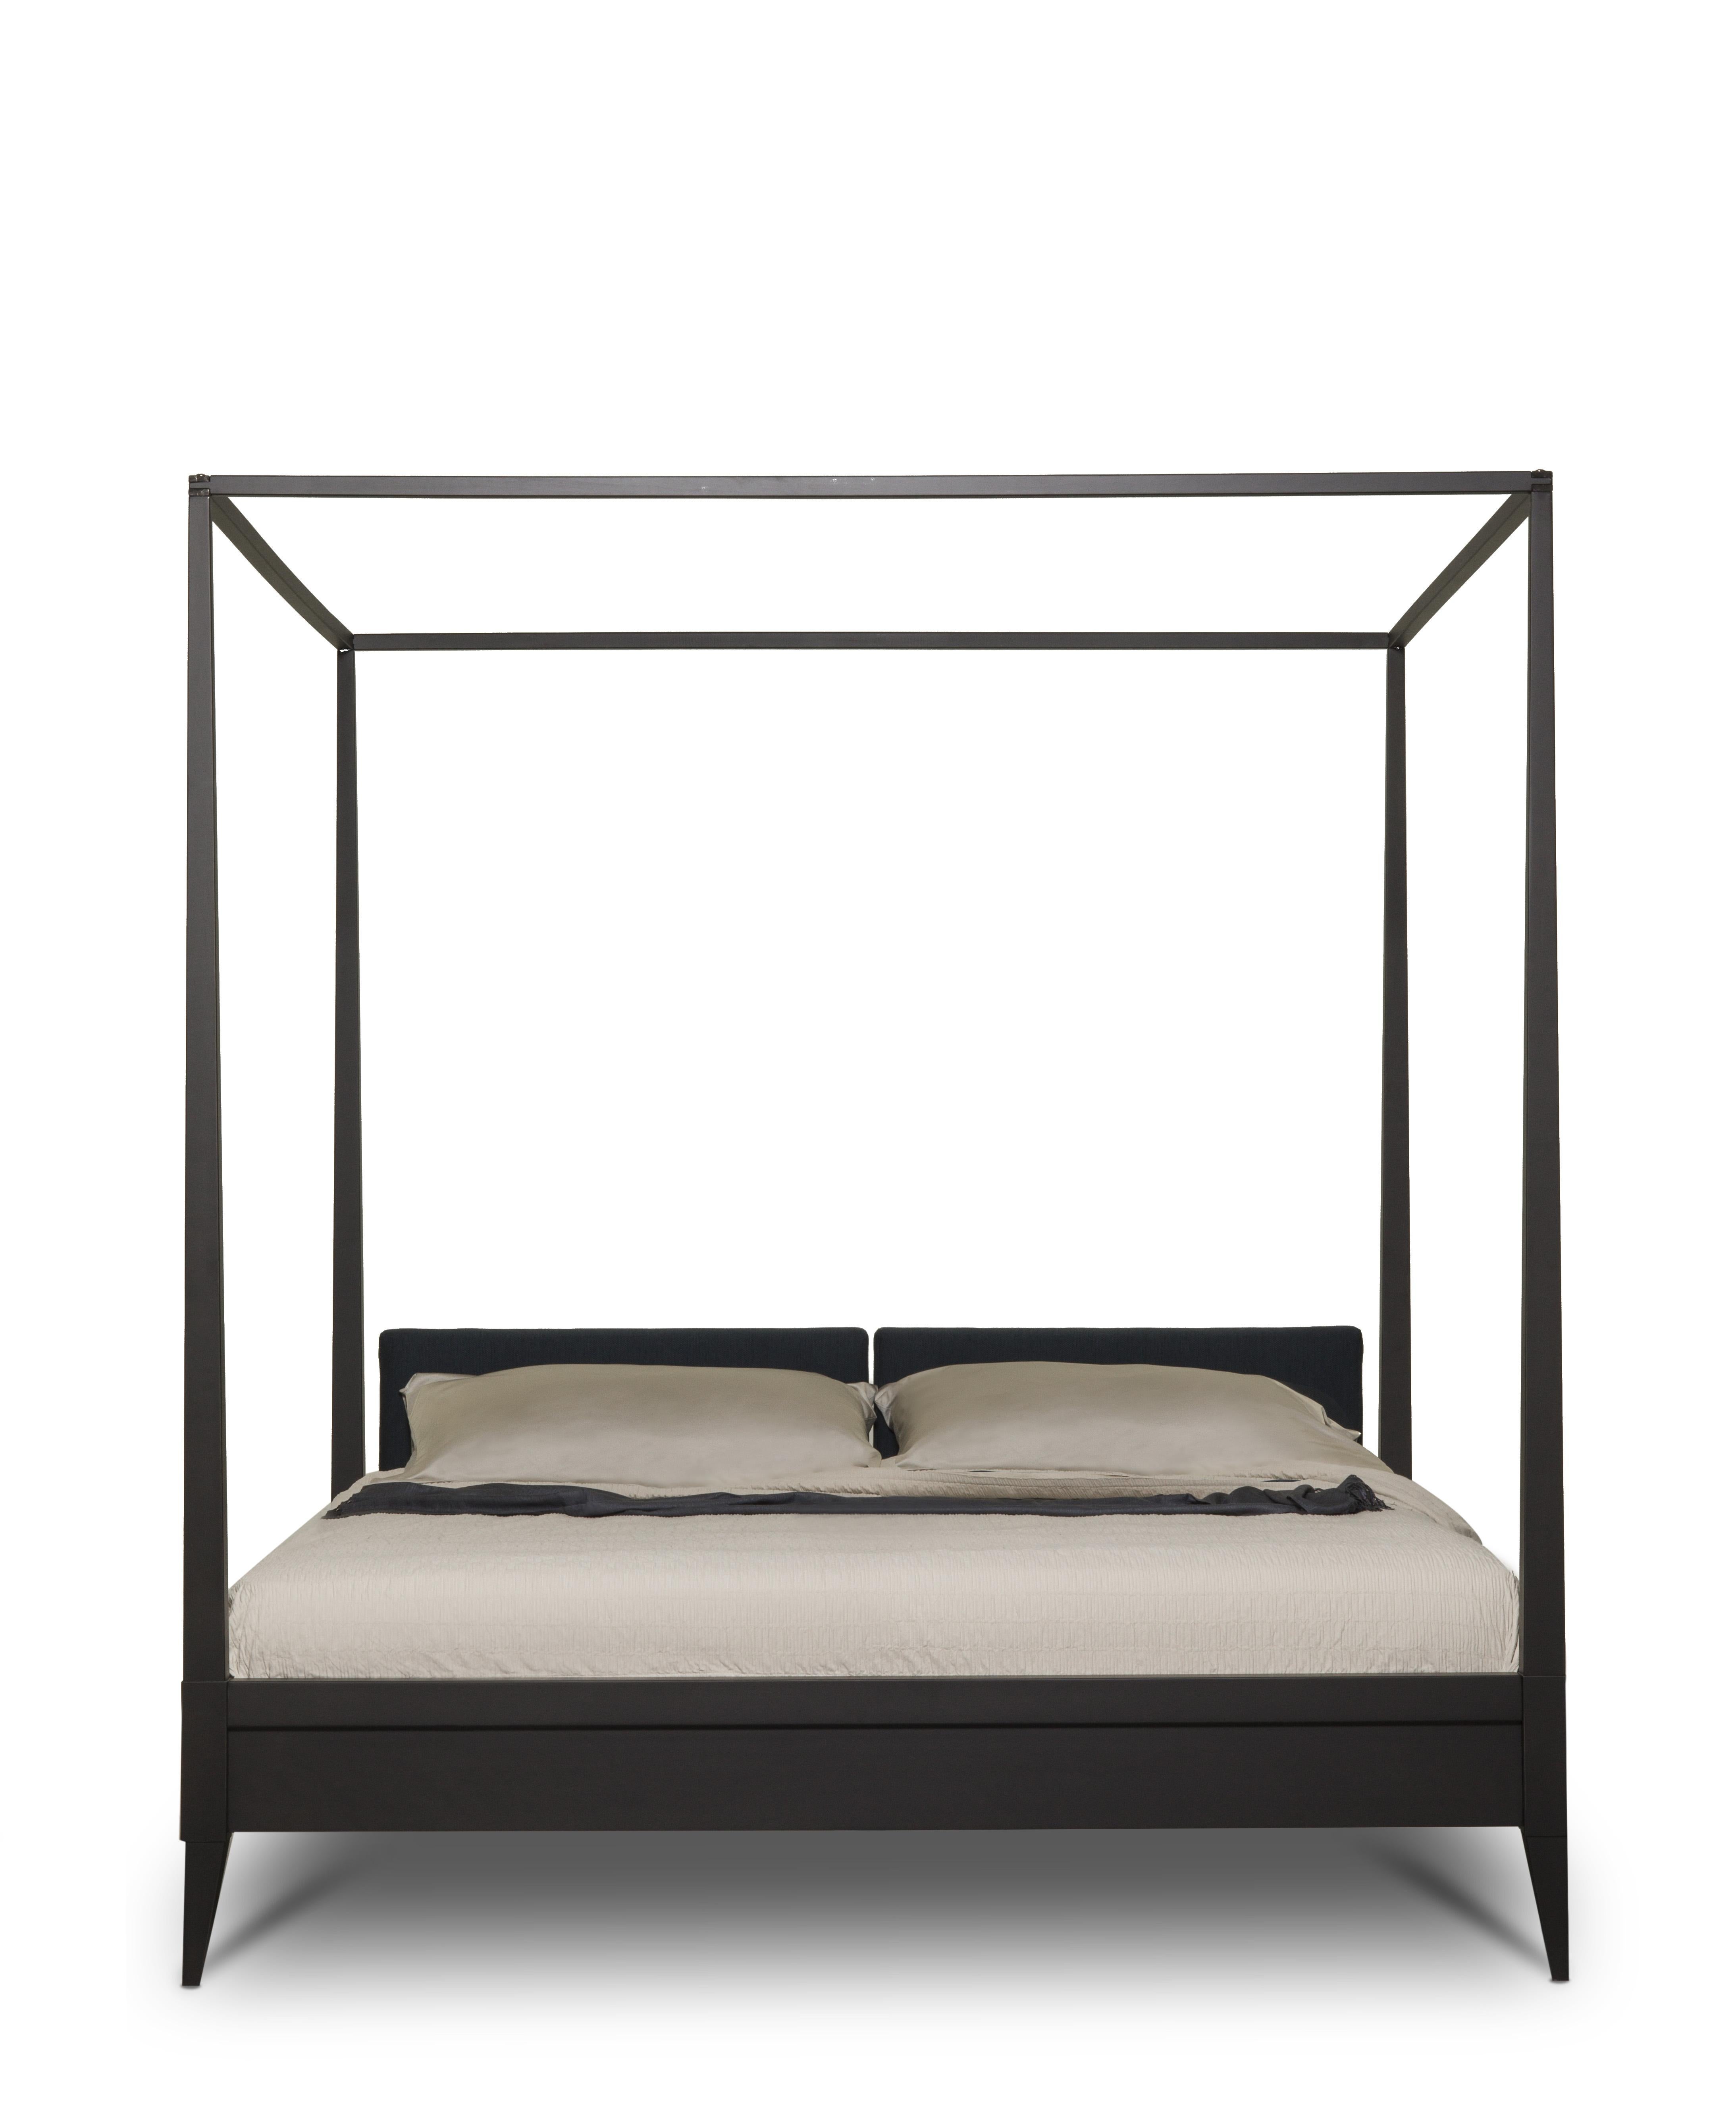 Valentino Canopy Bed Made of Cherrywood with Upholstered Headboard, by Morelato 4